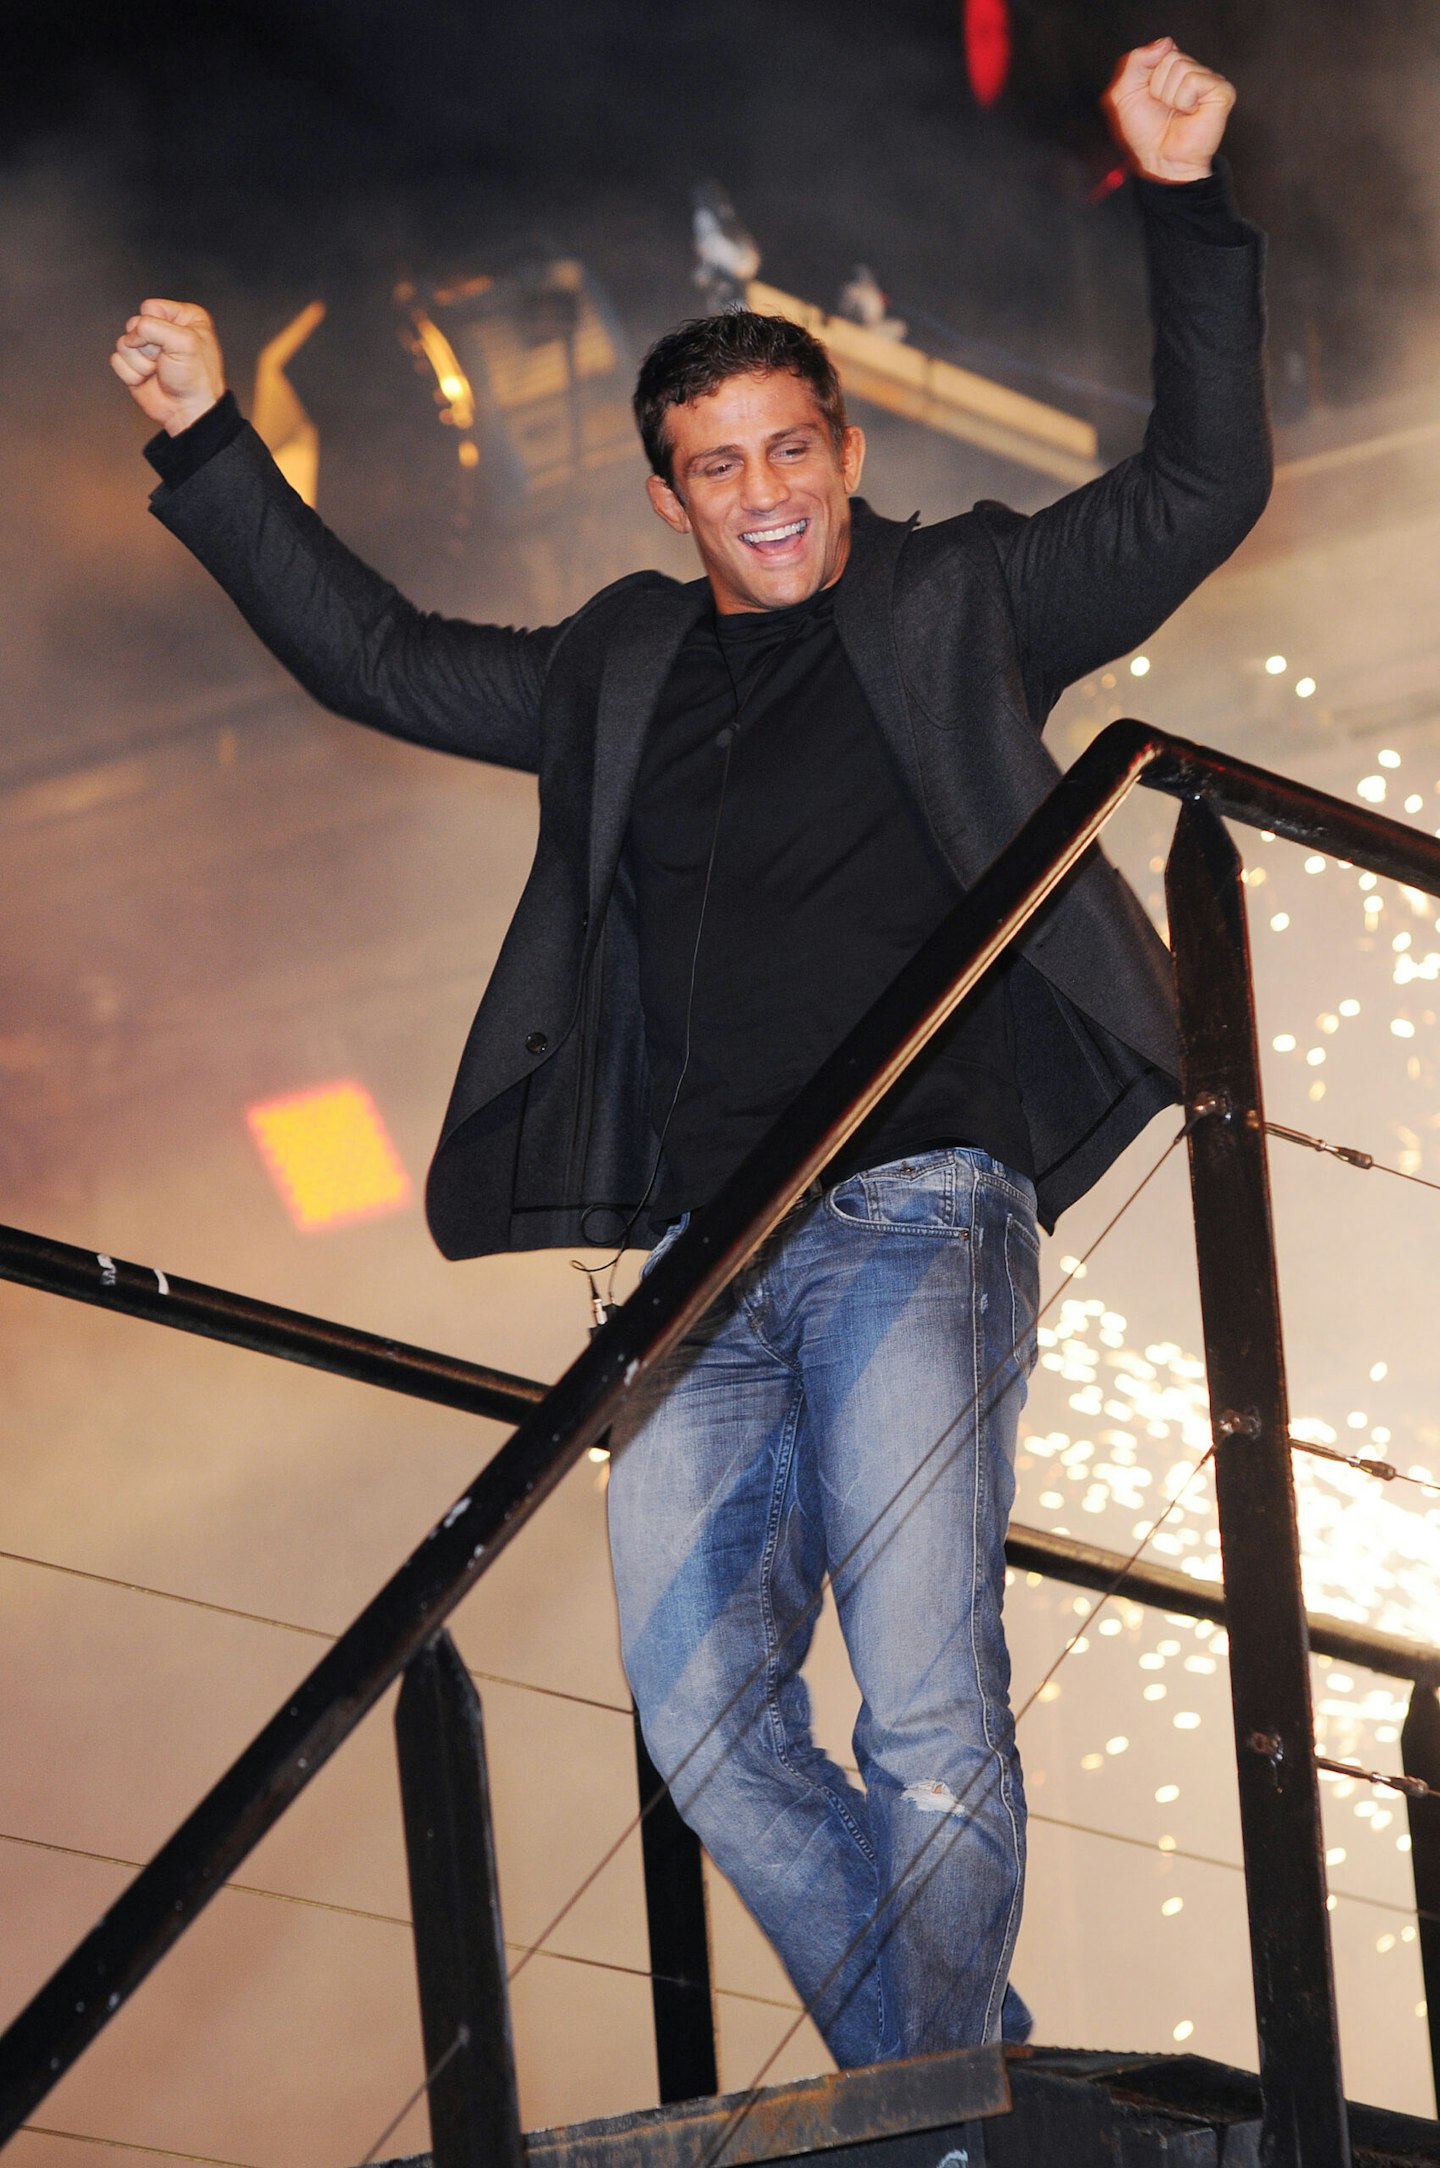 Alex Reid poses for photographs after winning Celebrity Big Brother in 2010